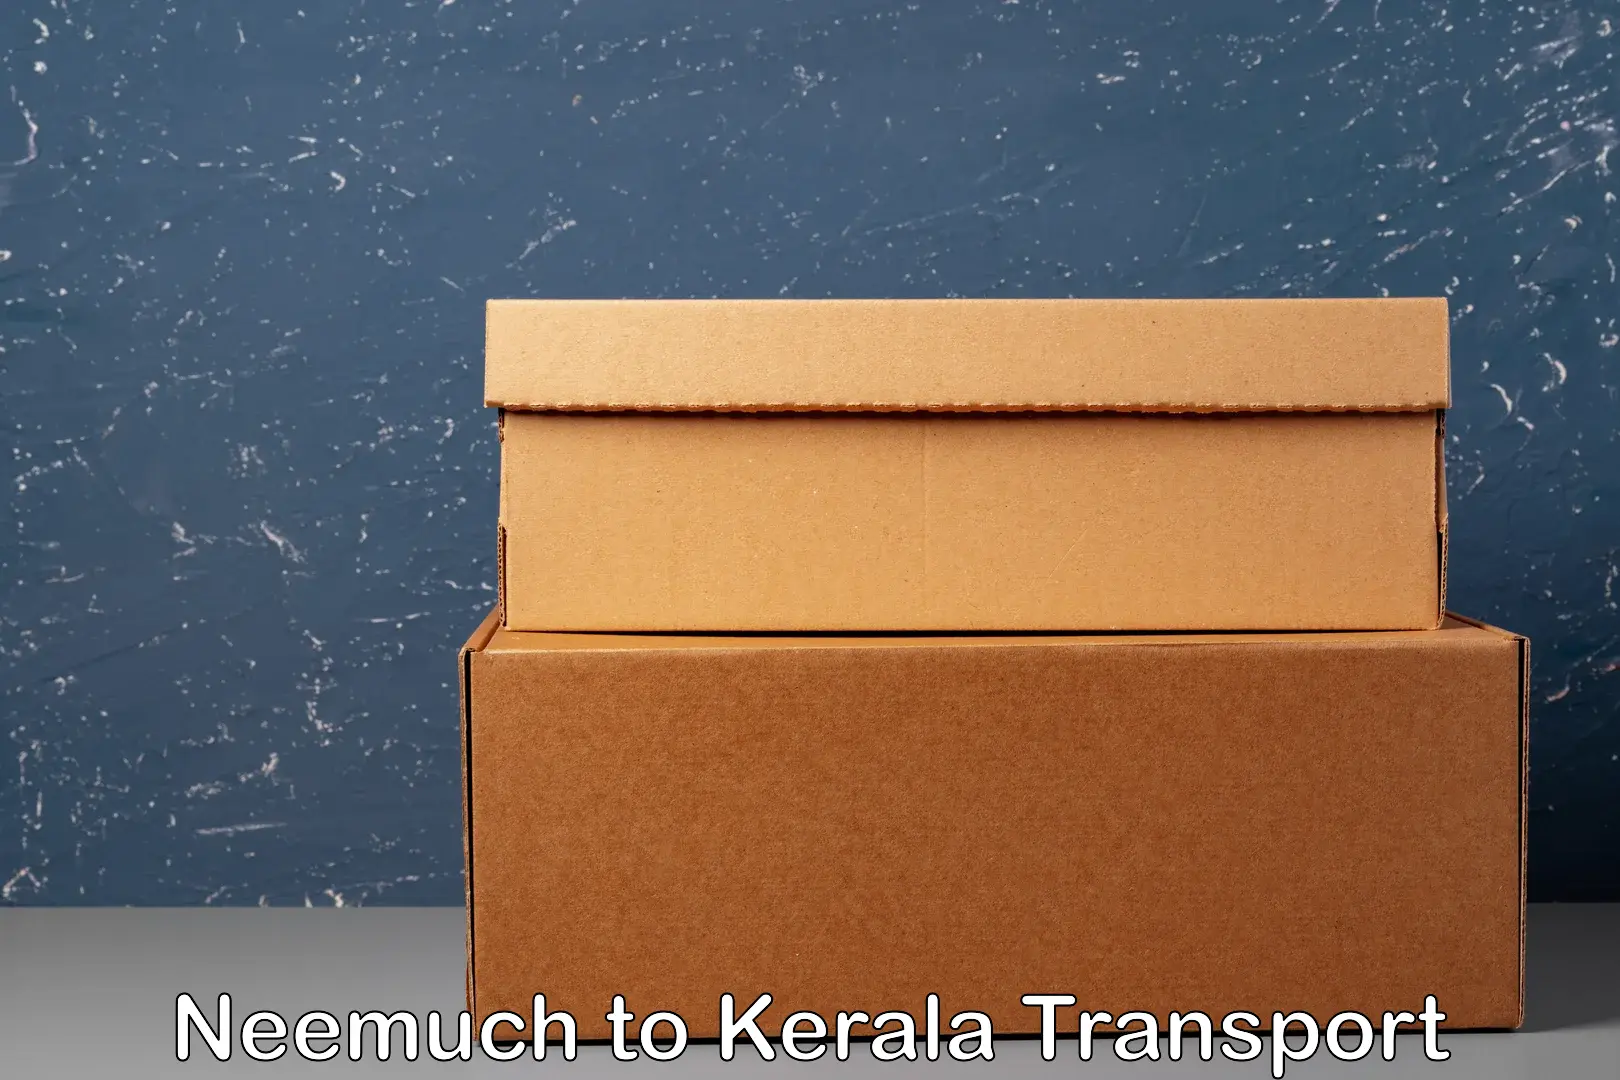 Shipping partner Neemuch to Kerala